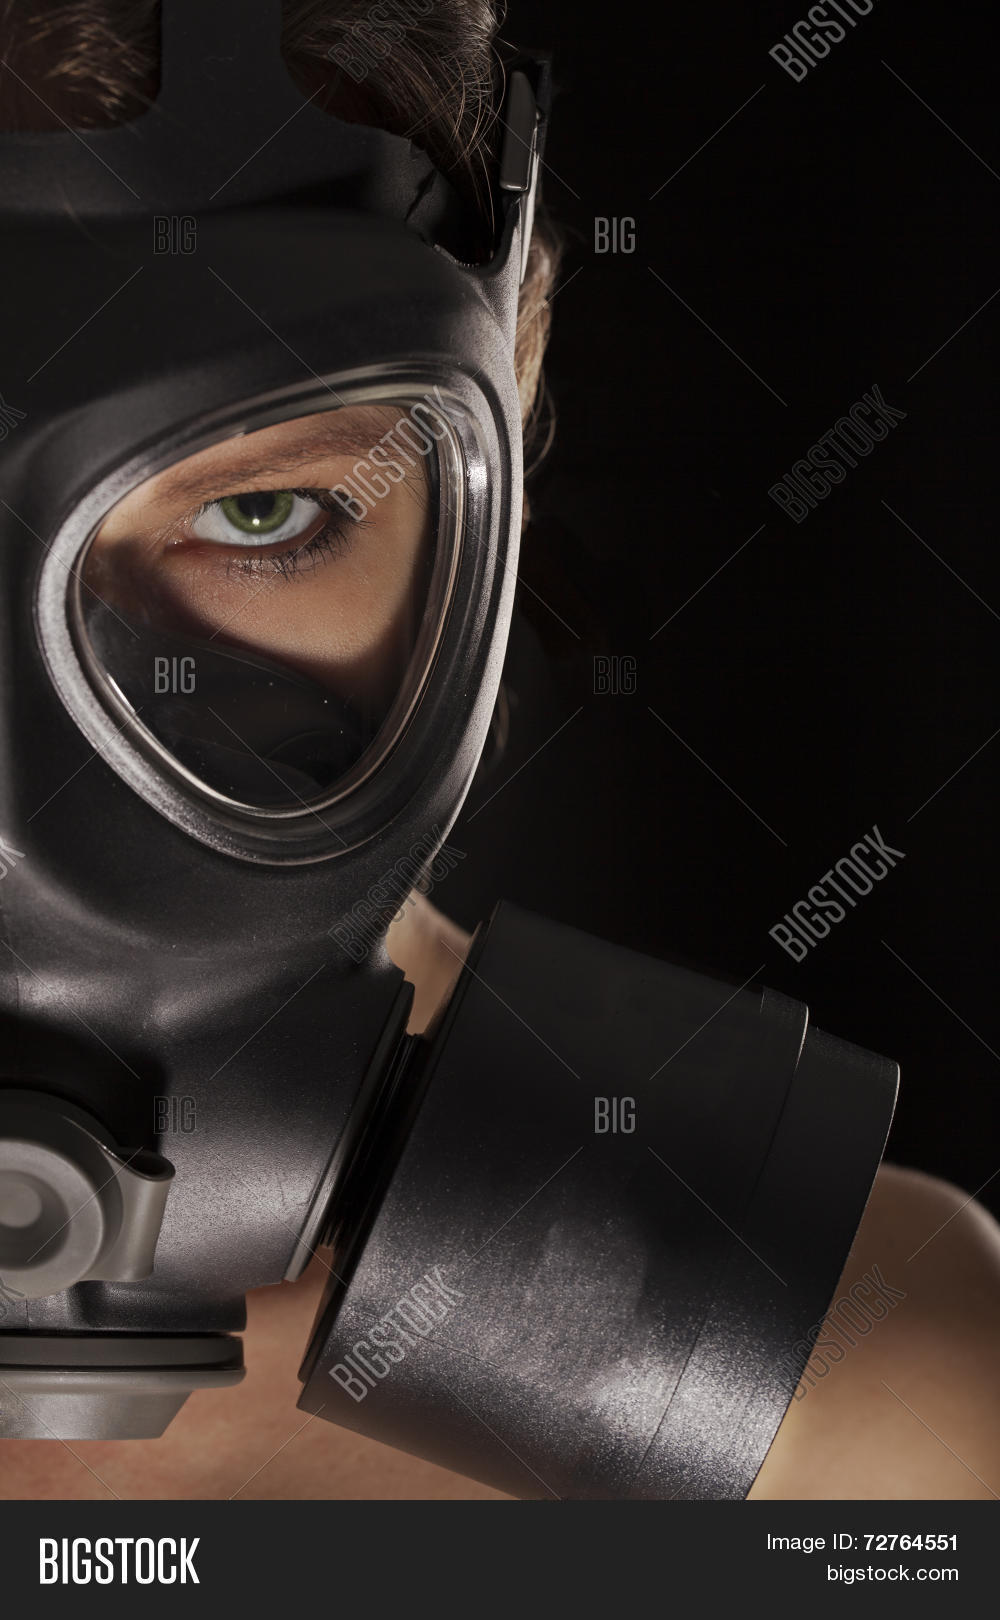 brandy kimbrough recommends girls wearing gas masks pic